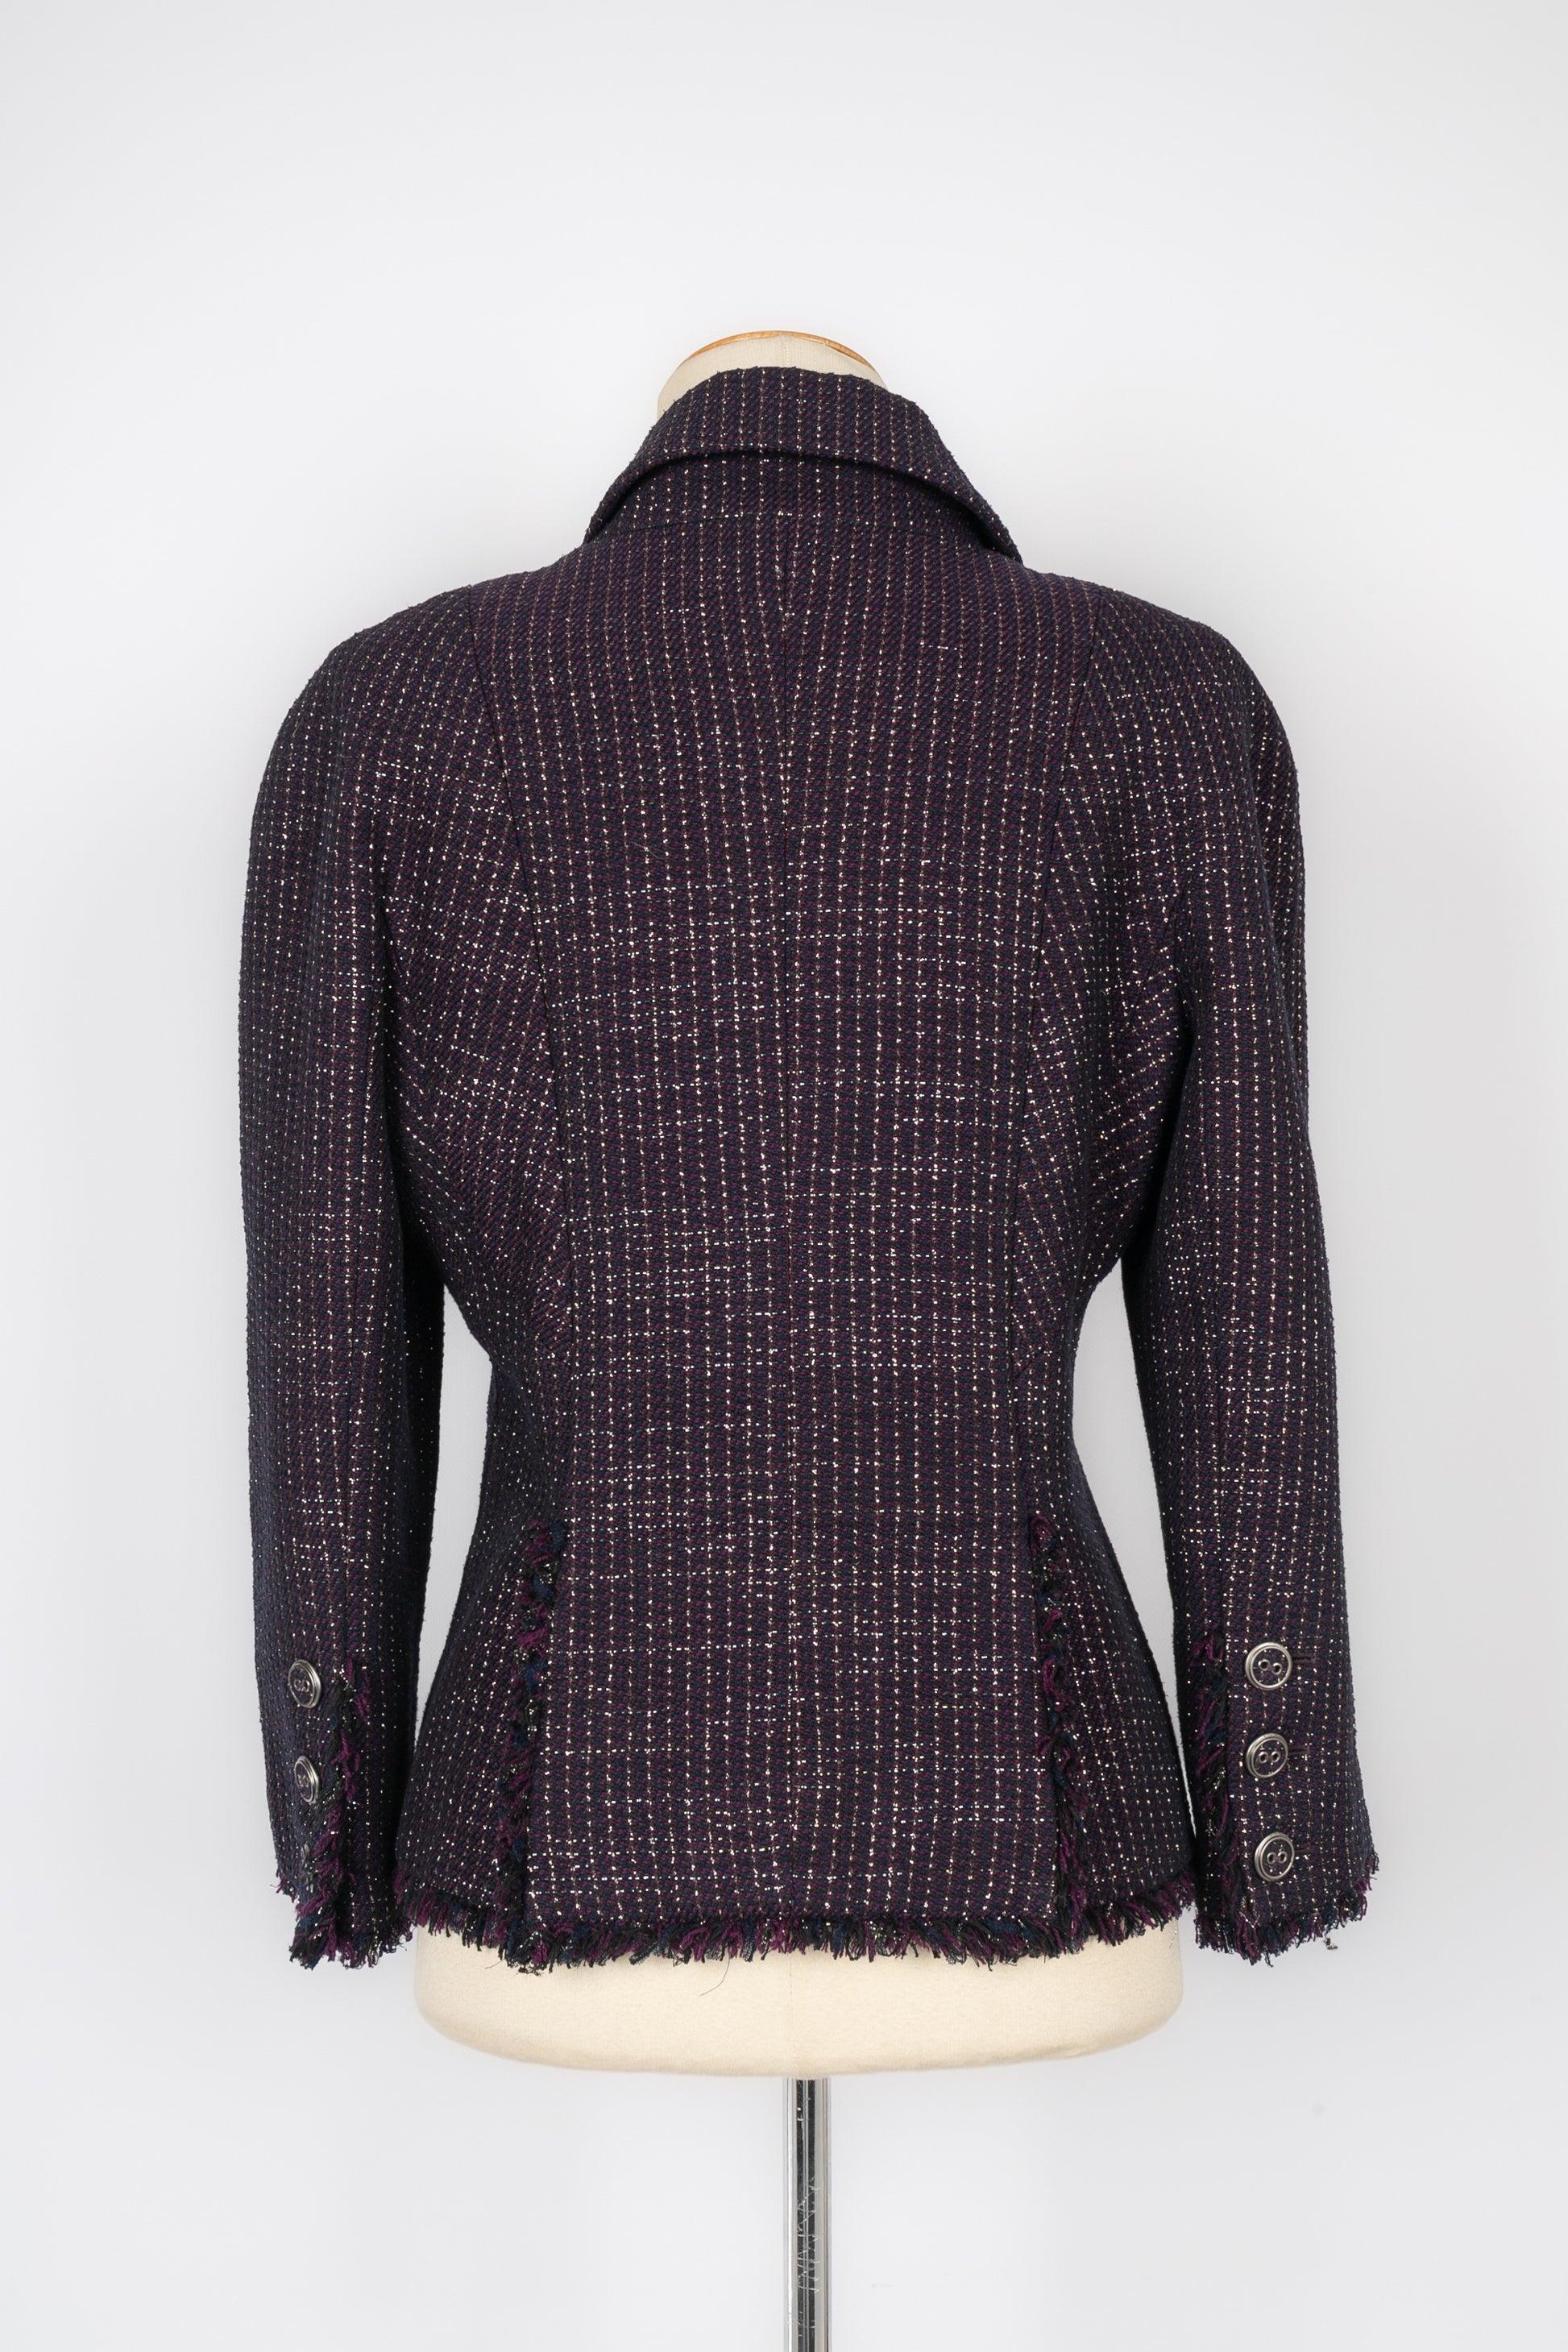 Chanel Blended Wool and Cotton Jacket Spring, 2008 In Excellent Condition For Sale In SAINT-OUEN-SUR-SEINE, FR